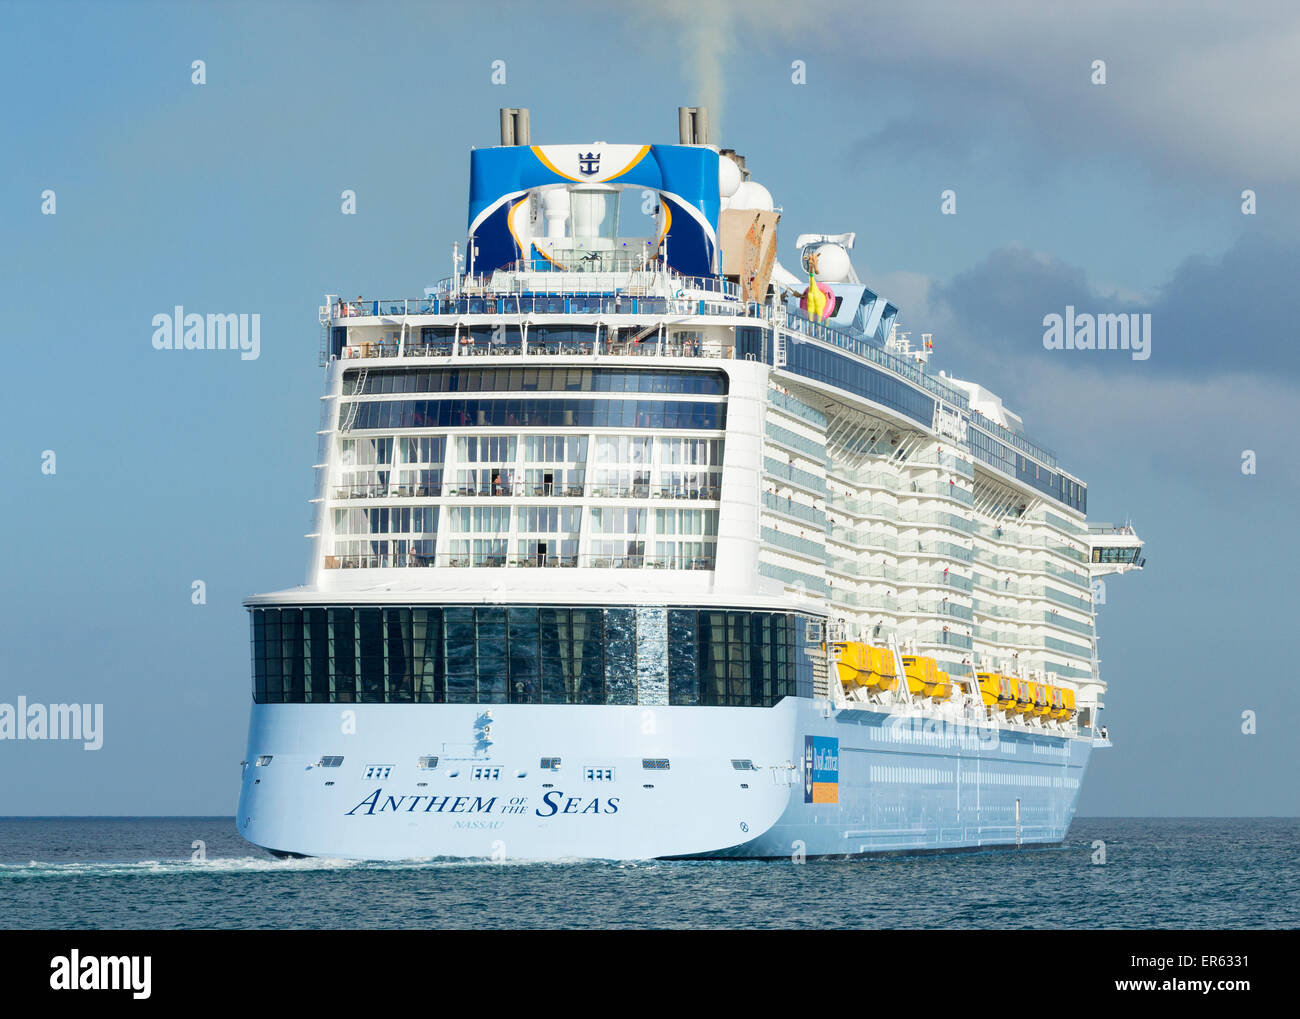 Las Palmas, Gran Canaria, Spain. 27th May, 2015. One of the largest cruise ships in the world, the sixteen decked Anthem of the Seas, departs Las Palmas on Wednesday evening following her maiden cruise to the Canary Islands. Anthem of the Seas was christened in Southampton ahead of her maiden cruise in April 2015. Credit:  ALANDAWSONPHOTOGRAPHY/Alamy Live News Stock Photo